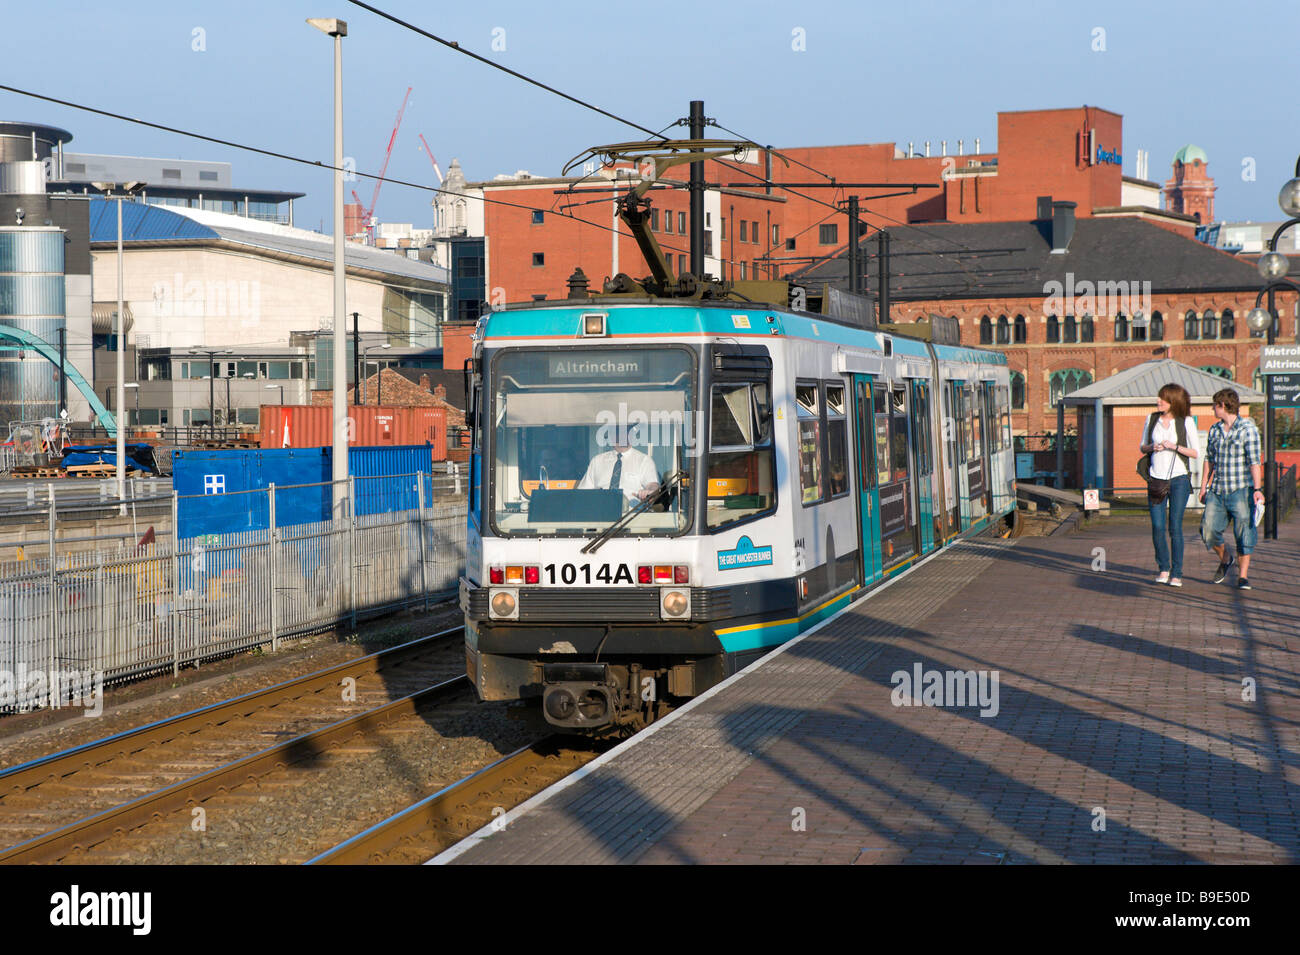 Metrolink tram at the G-Mex tram stop in the late afternoon, Manchester, England Stock Photo